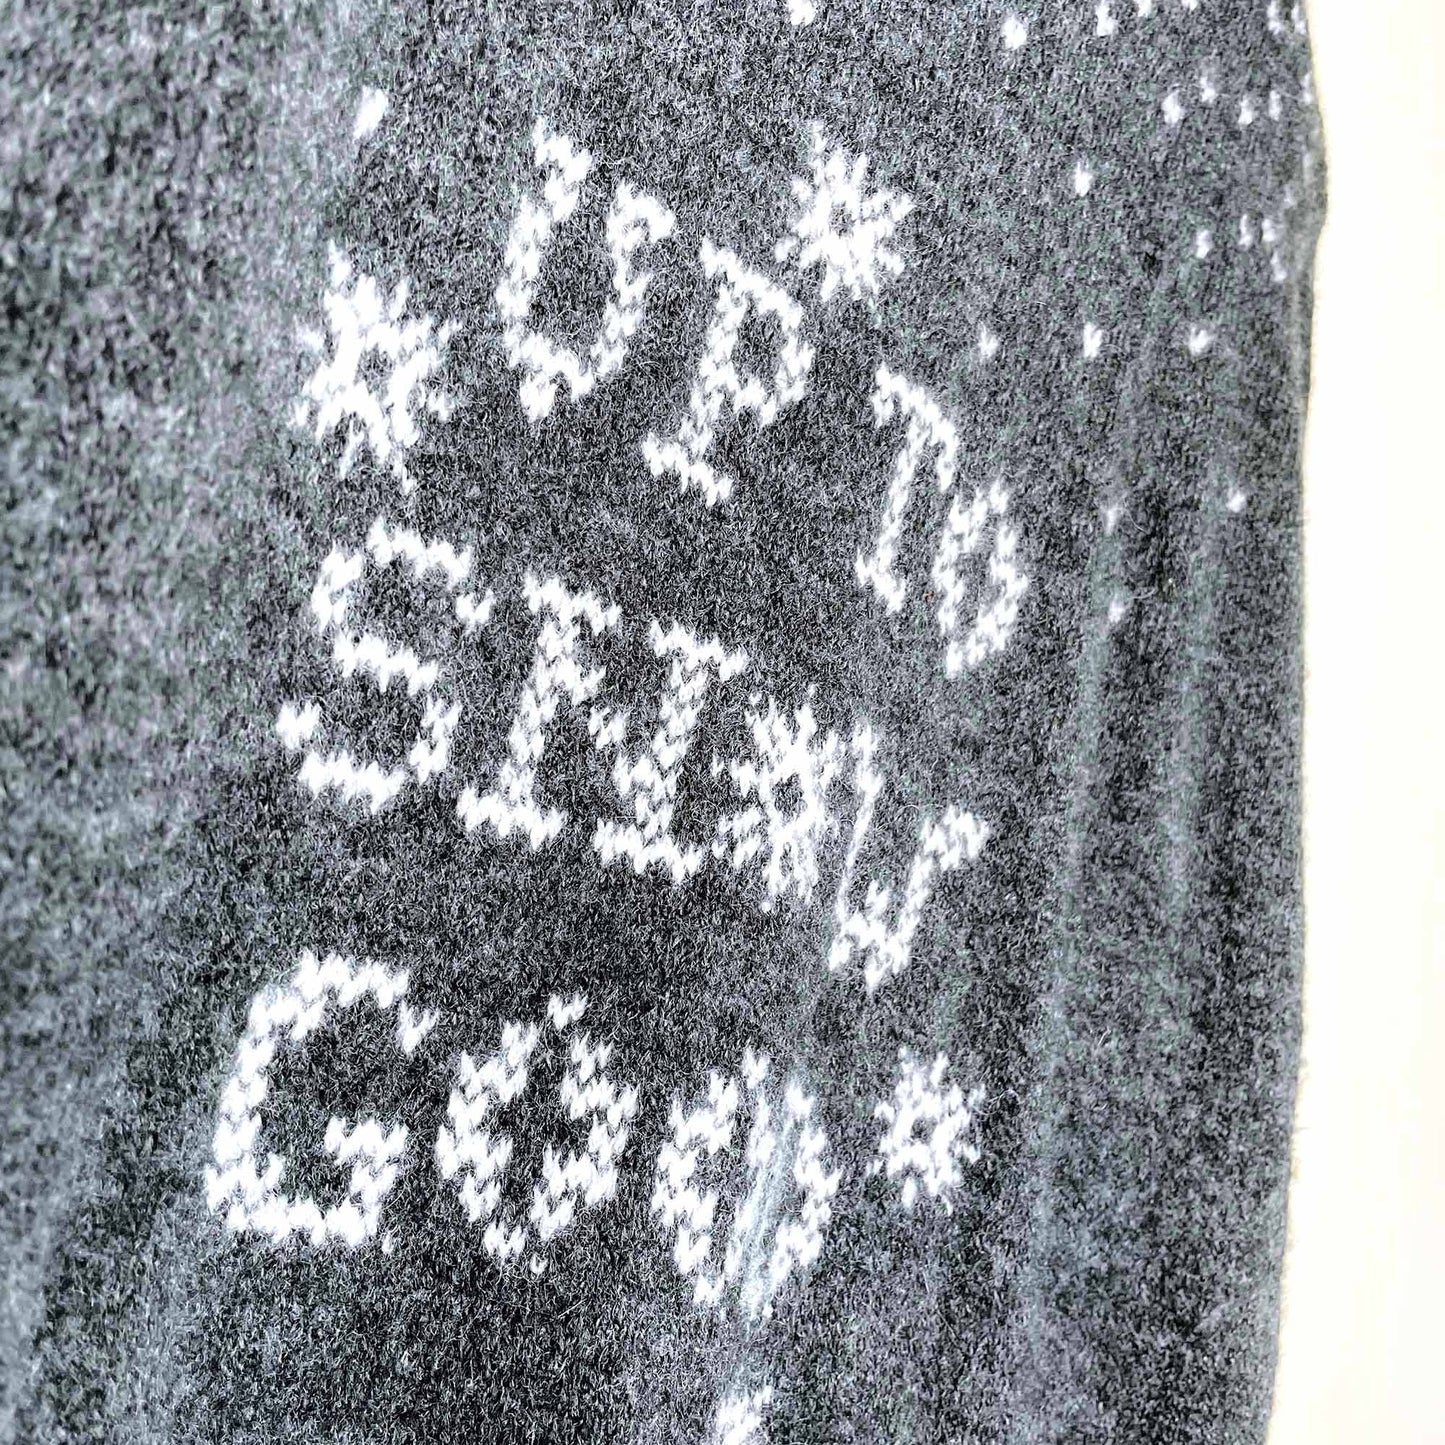 h&m up to snow good jacquard knit cozy holiday sweater - size large